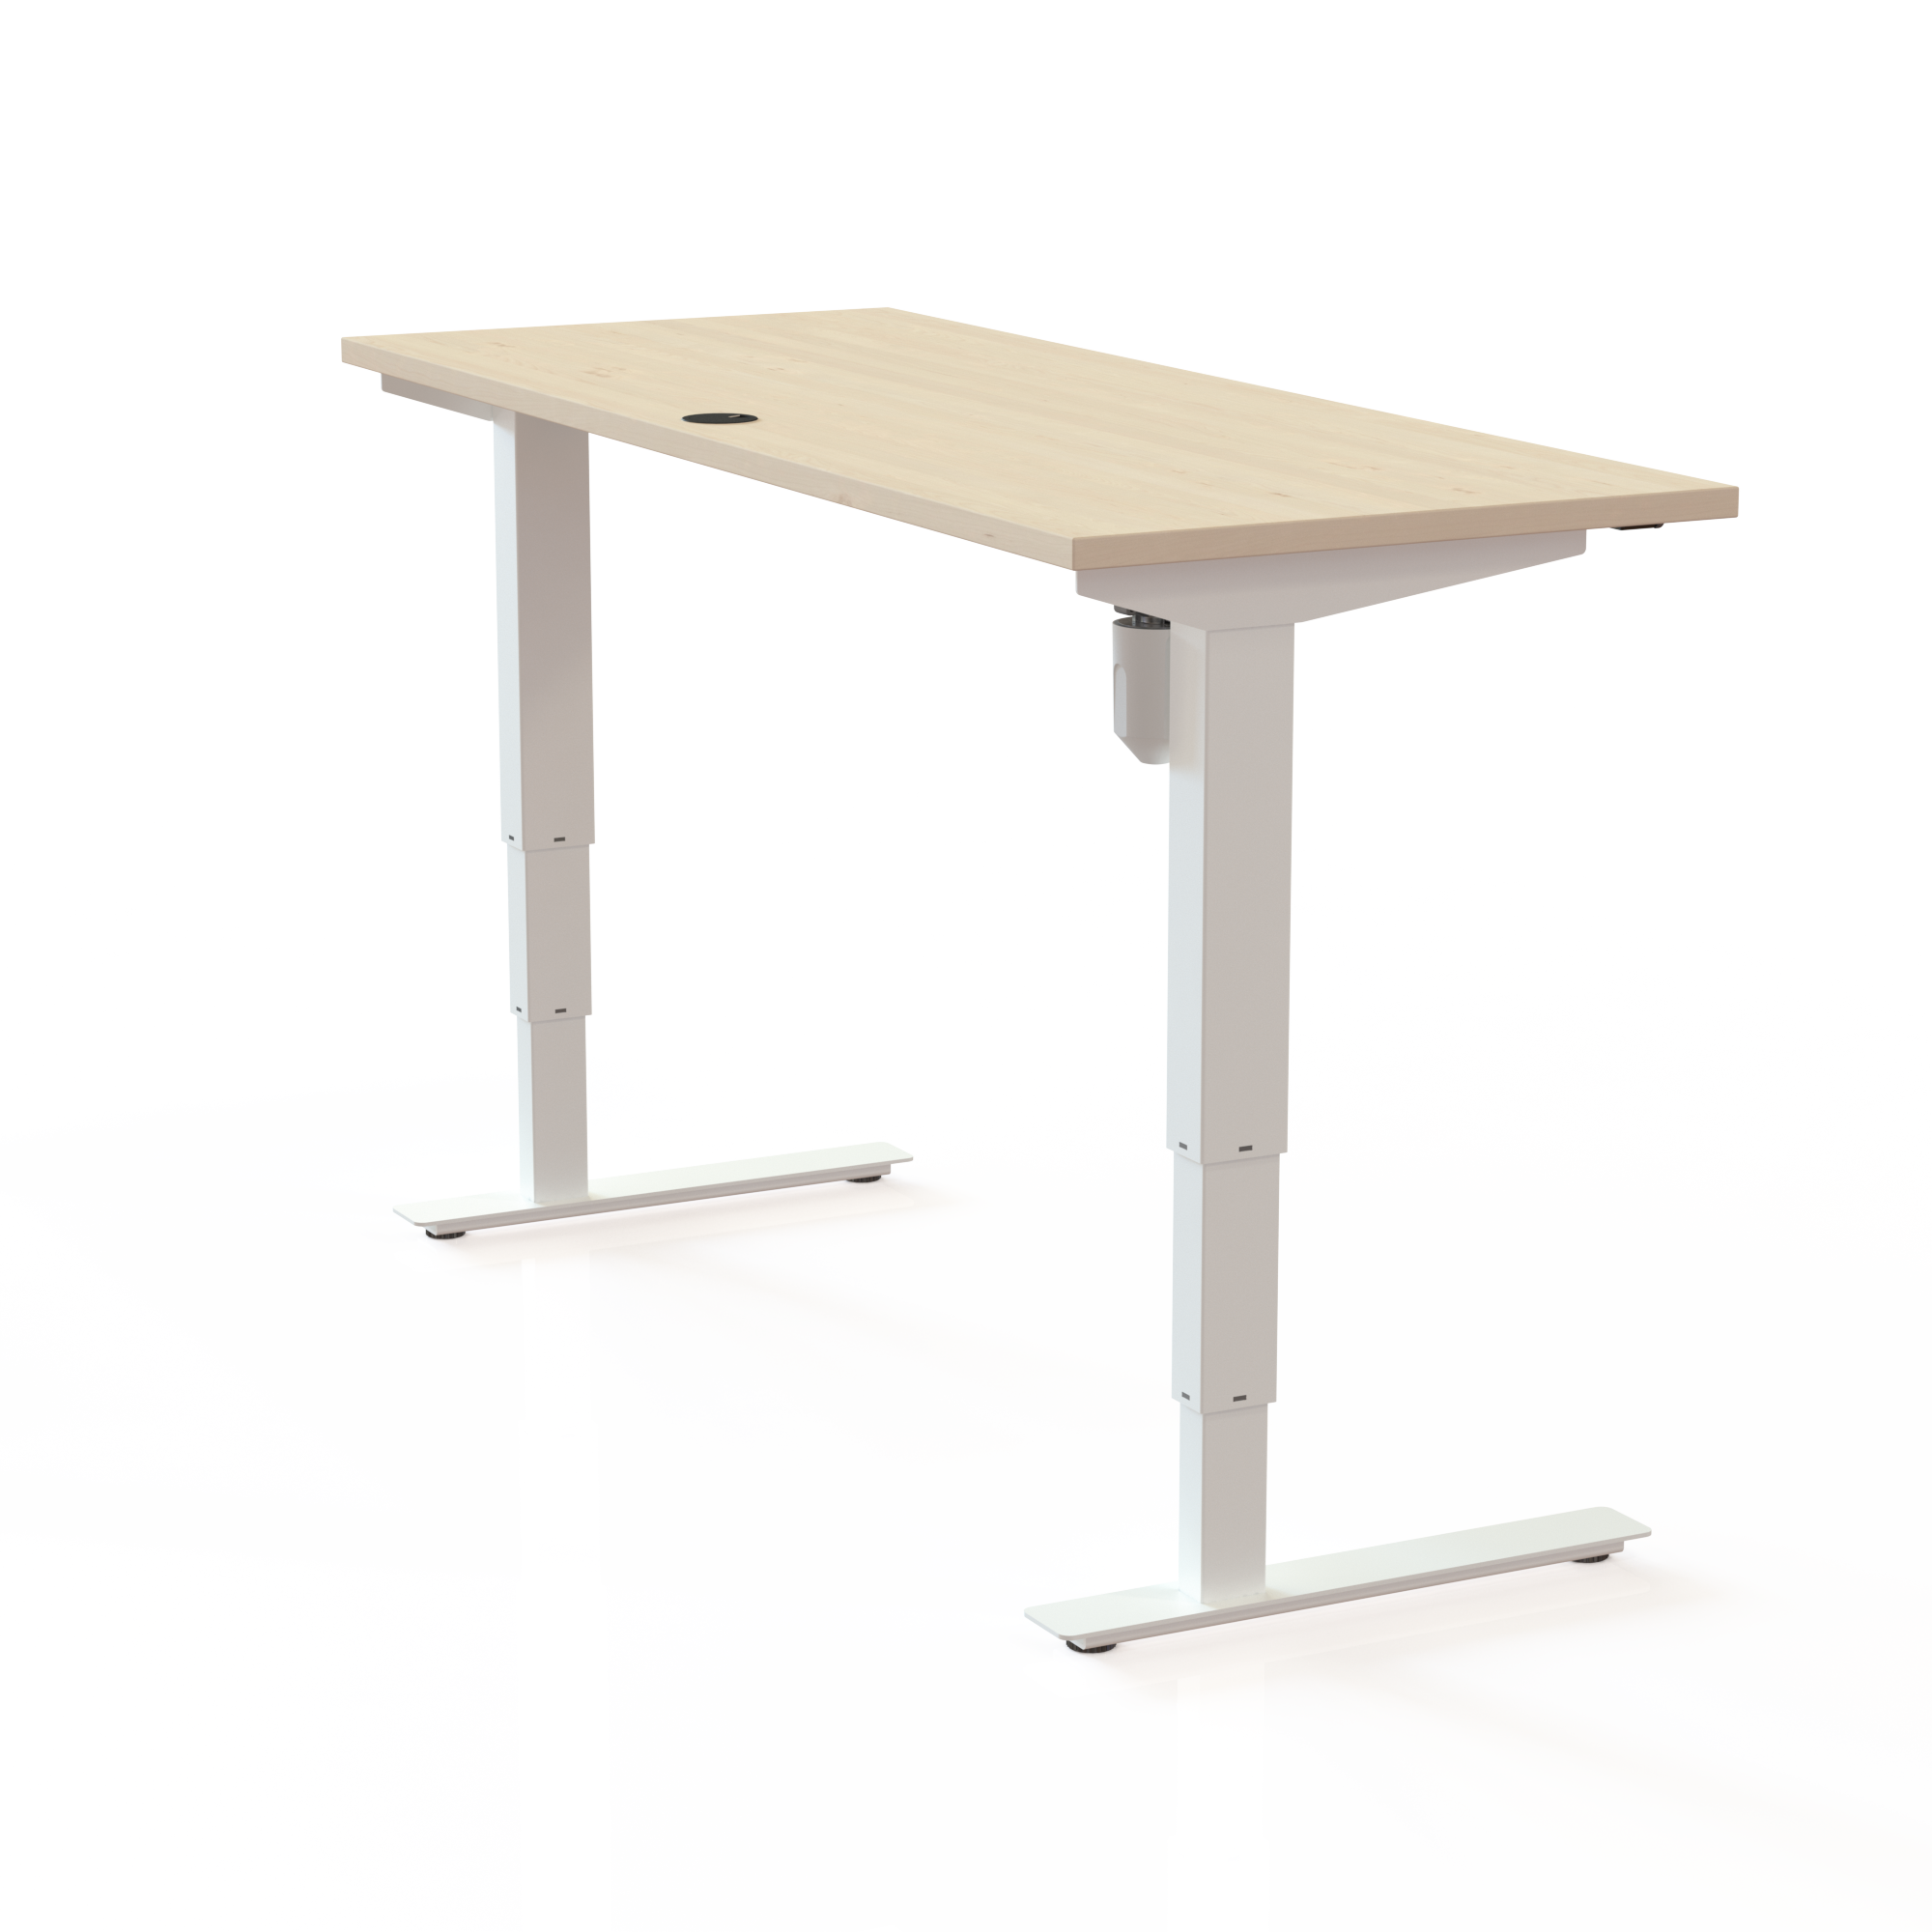 Electric Adjustable Desk | 150x60 cm | Maple with white frame